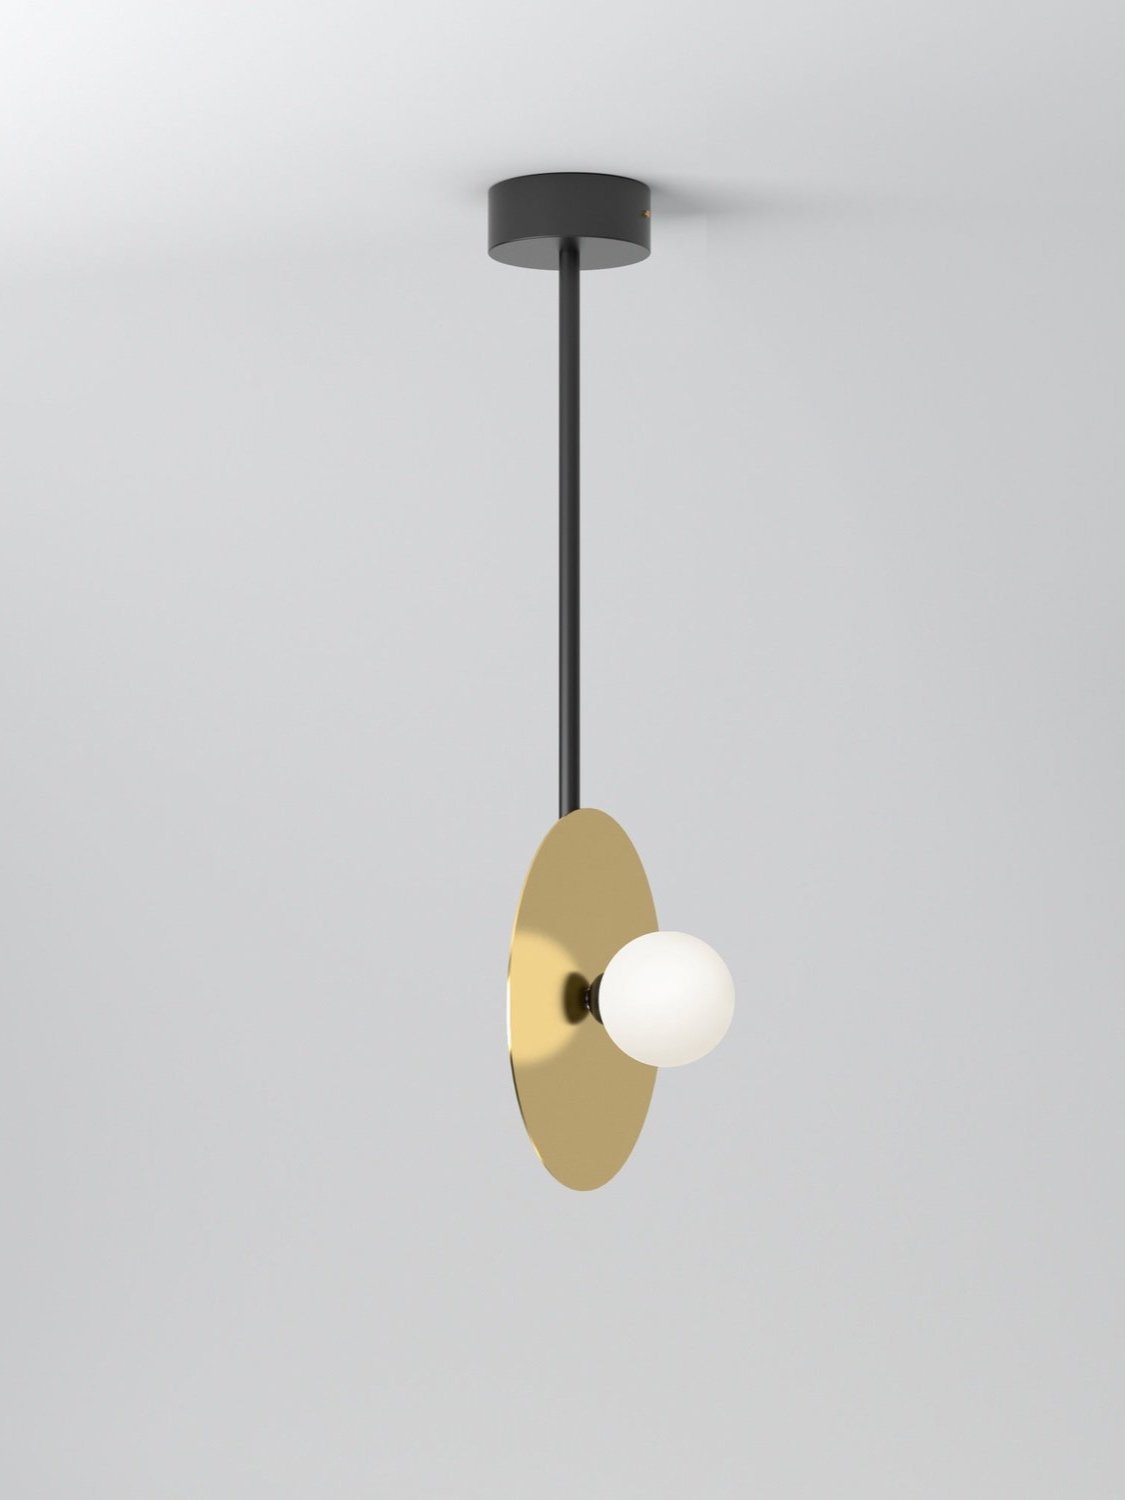 Disc and Sphere / Vertical 1 /DISC AND SPHERE PENDANT LIGHT / VERTICAL - 1 DISC / PILL BOX ATTACHMENT 